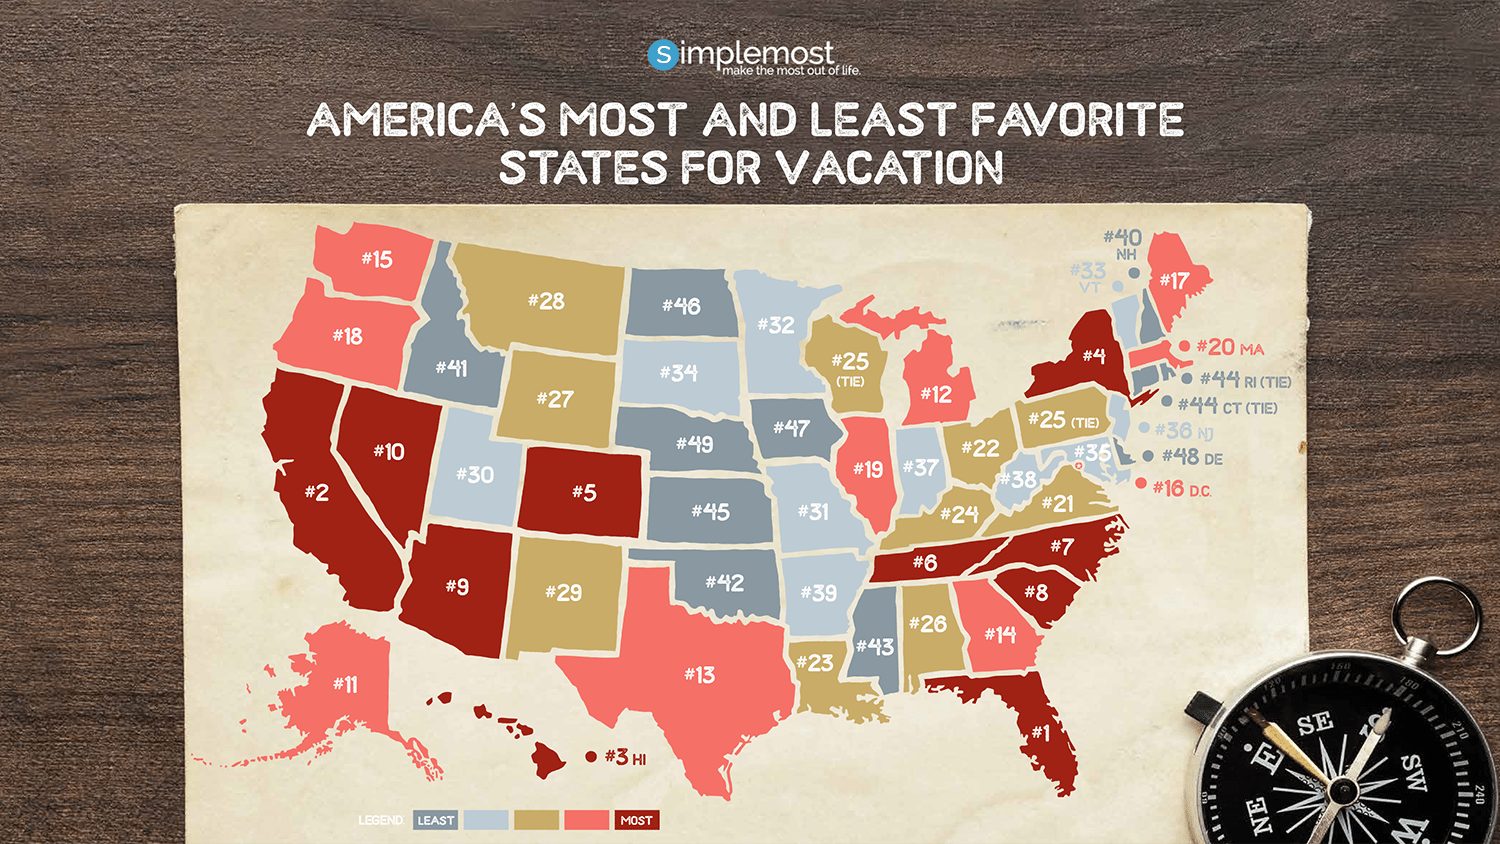 a map showing America's most and least favorite states for vacation